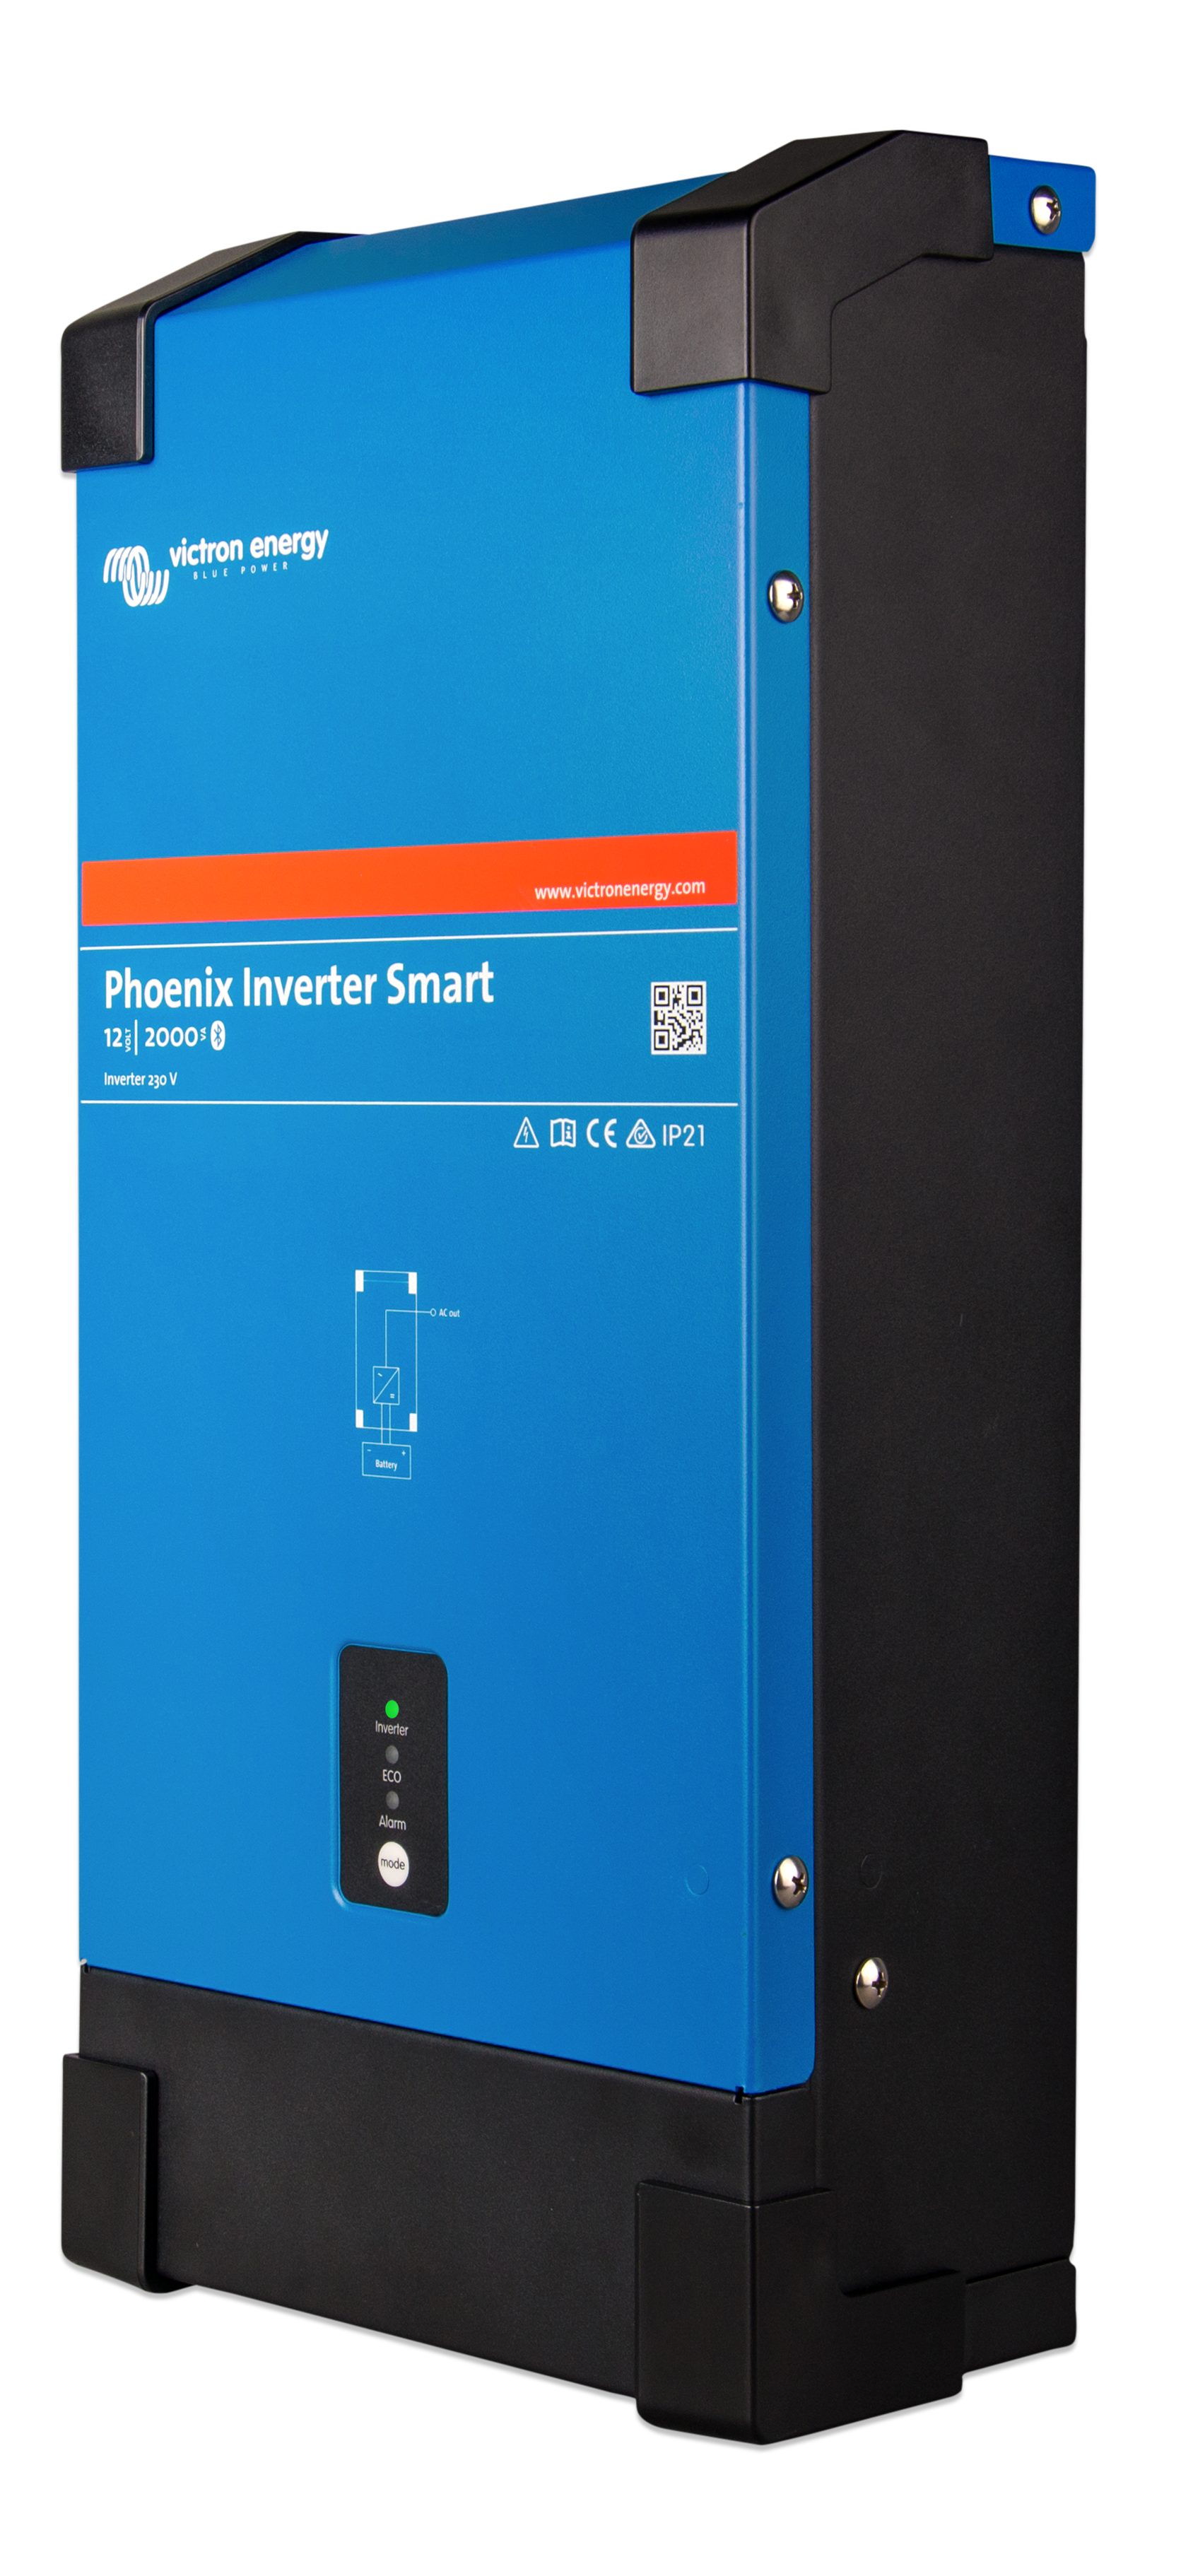 phoenix-inverter-smart-1600va-and-2000va-out-now-victron-energy